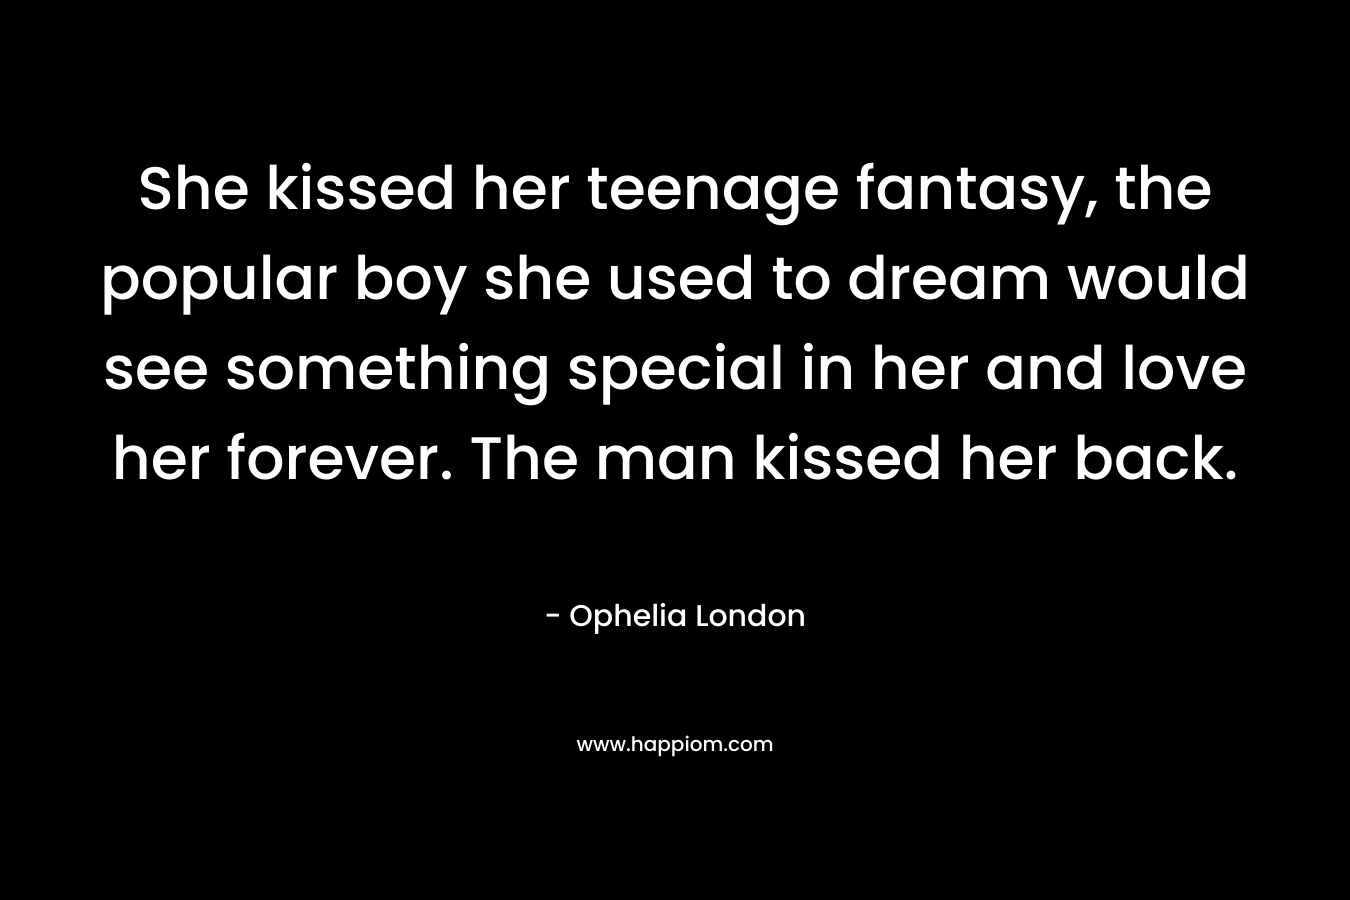 She kissed her teenage fantasy, the popular boy she used to dream would see something special in her and love her forever. The man kissed her back.